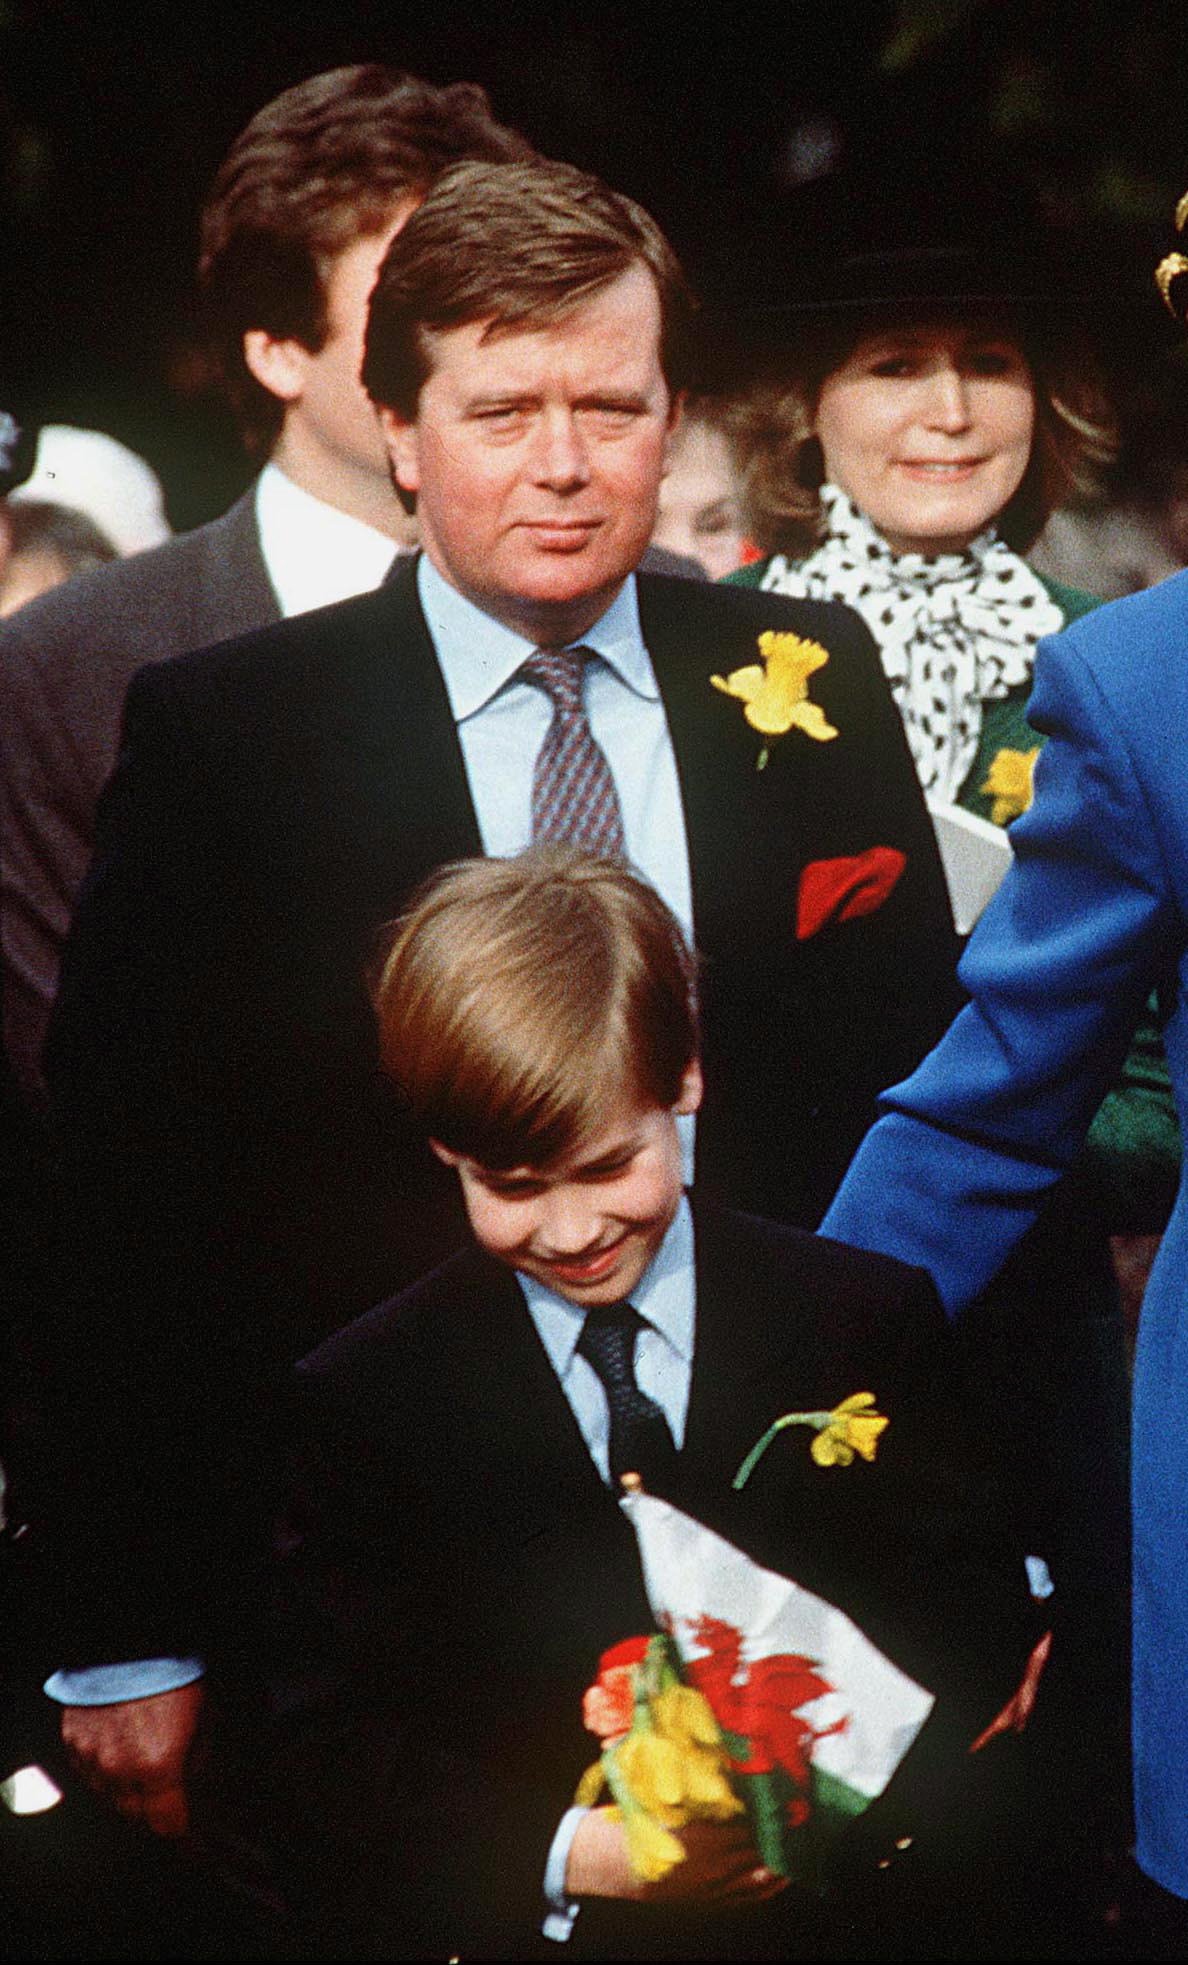 Princess Diana's bodyguard, Ken Wharfe, with her son, Prince William, during a visit to Wales, United Kingdom. | Source: Getty Images 